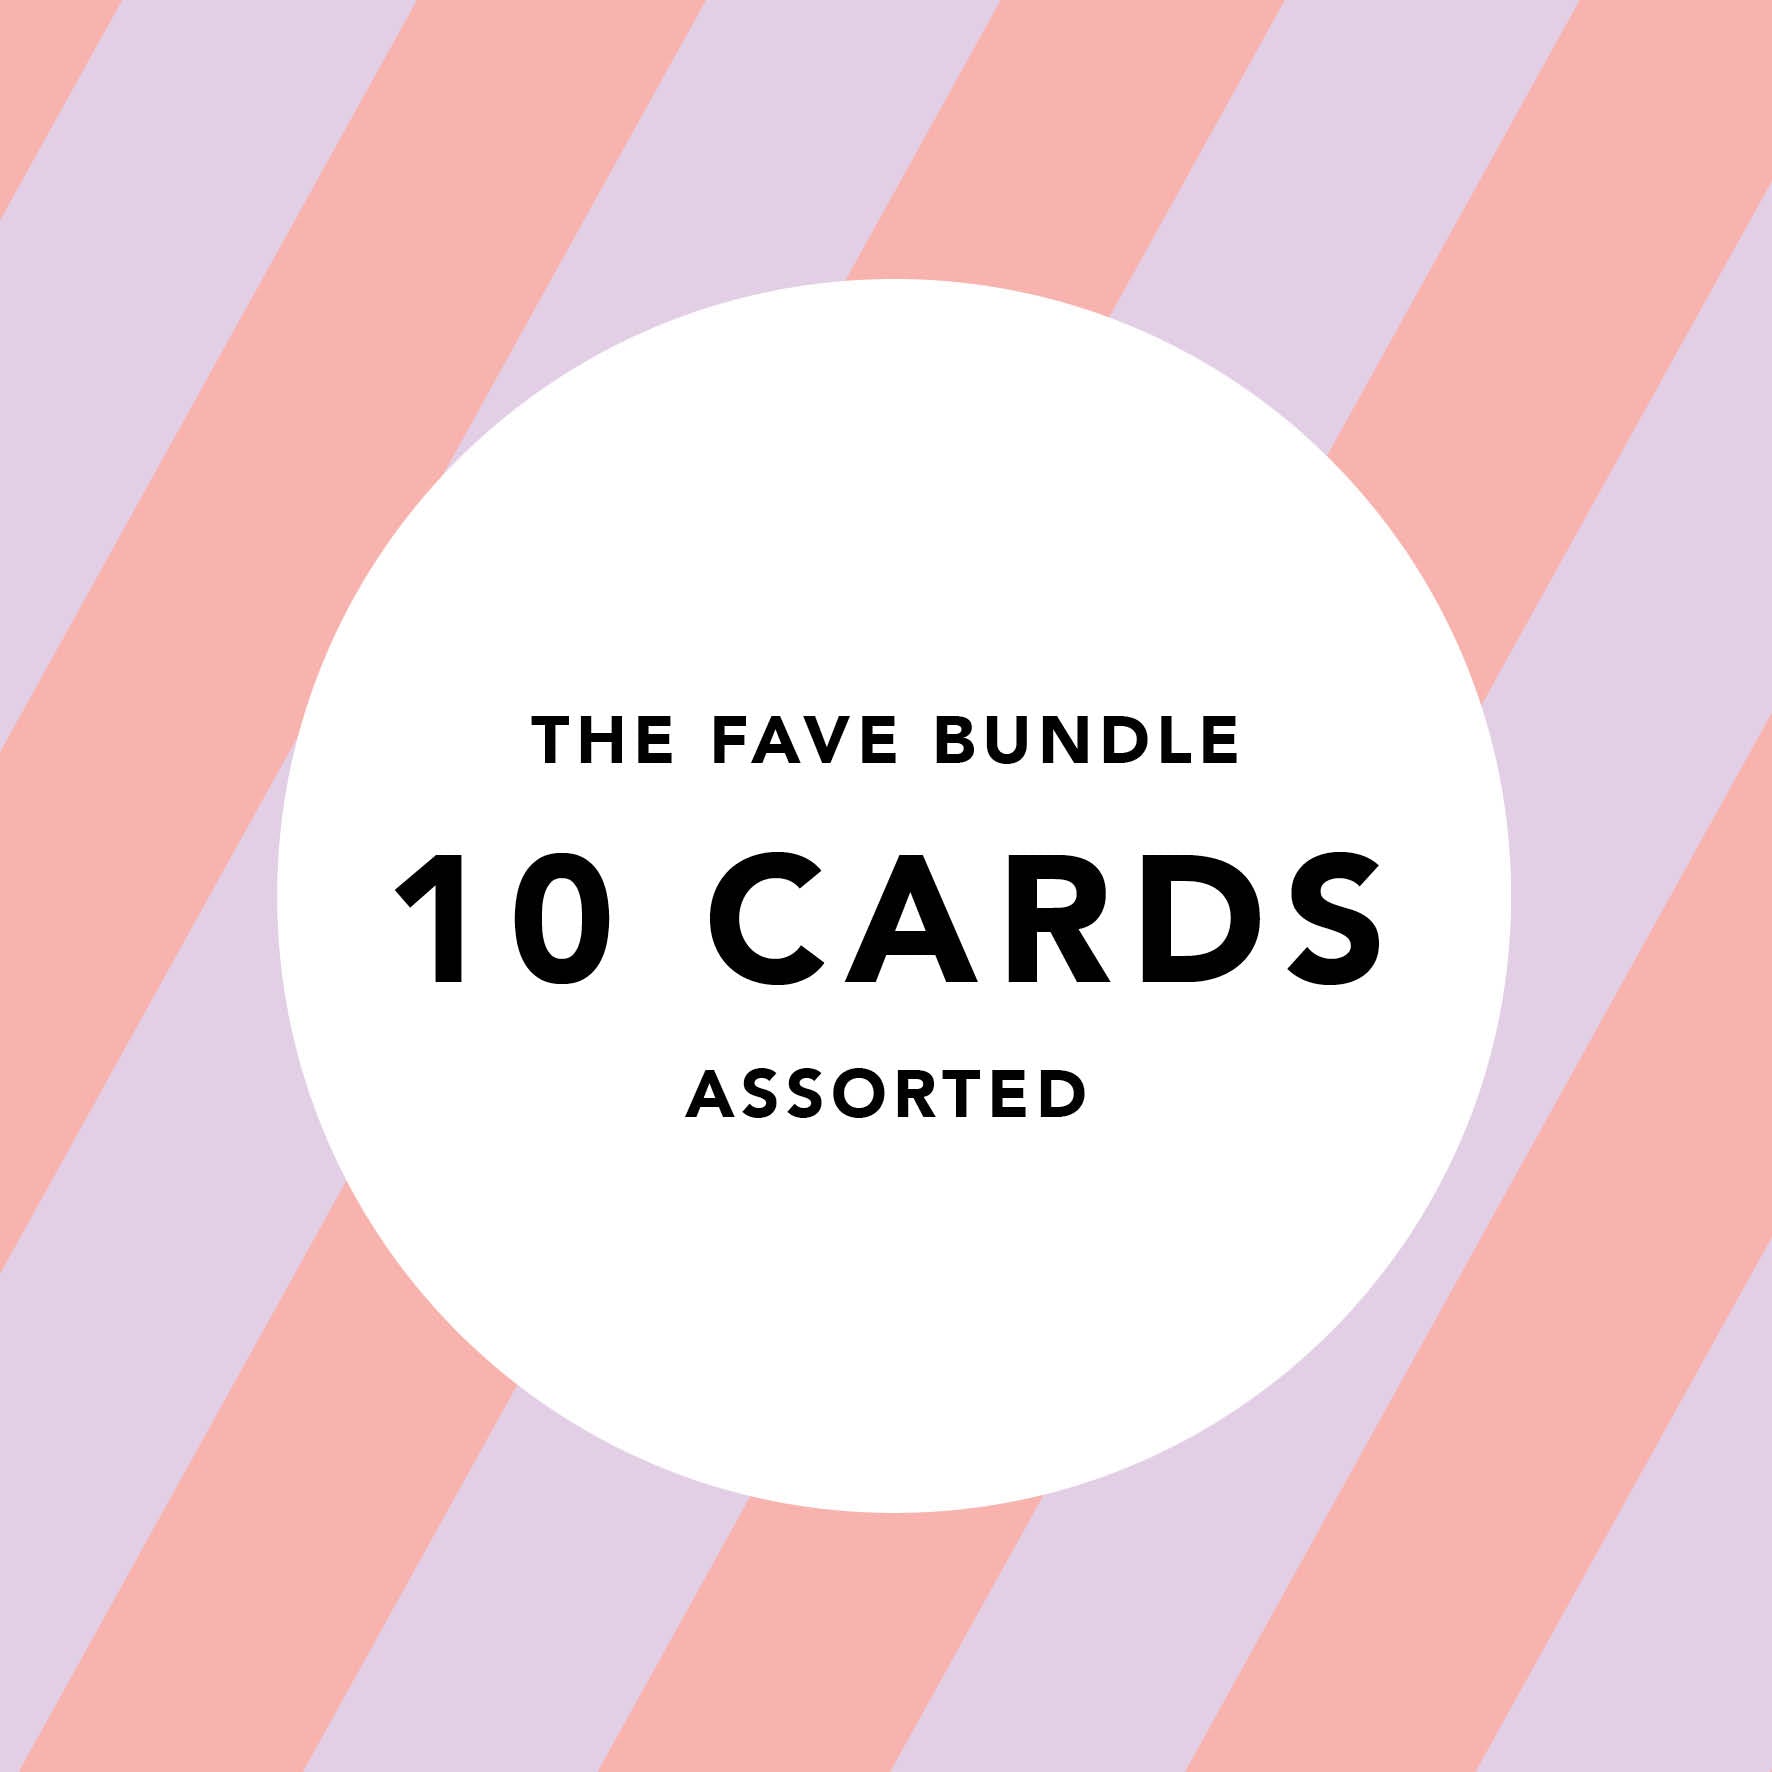 The Fave Bundle of 10 Assorted Cards